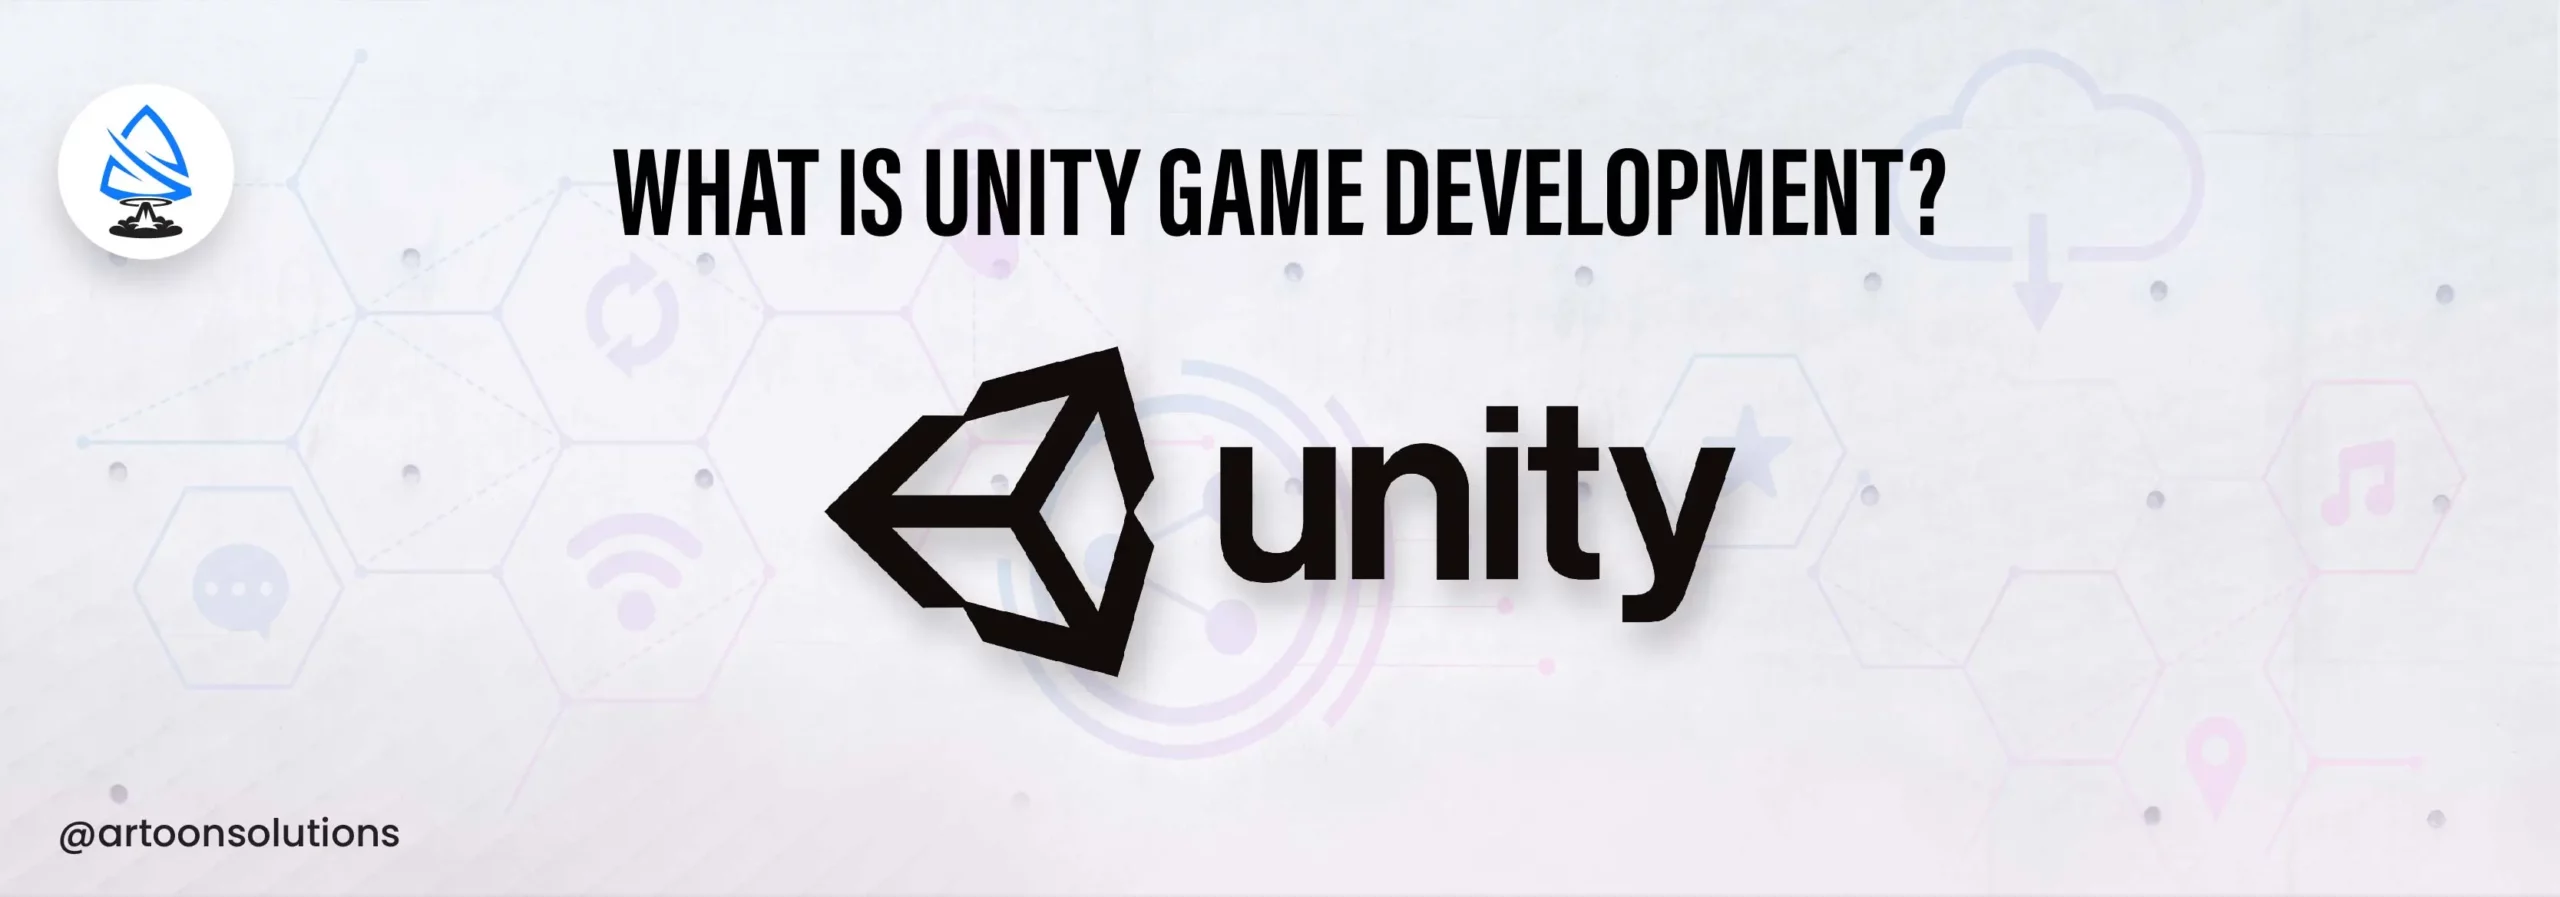 What is Unity Game Development?